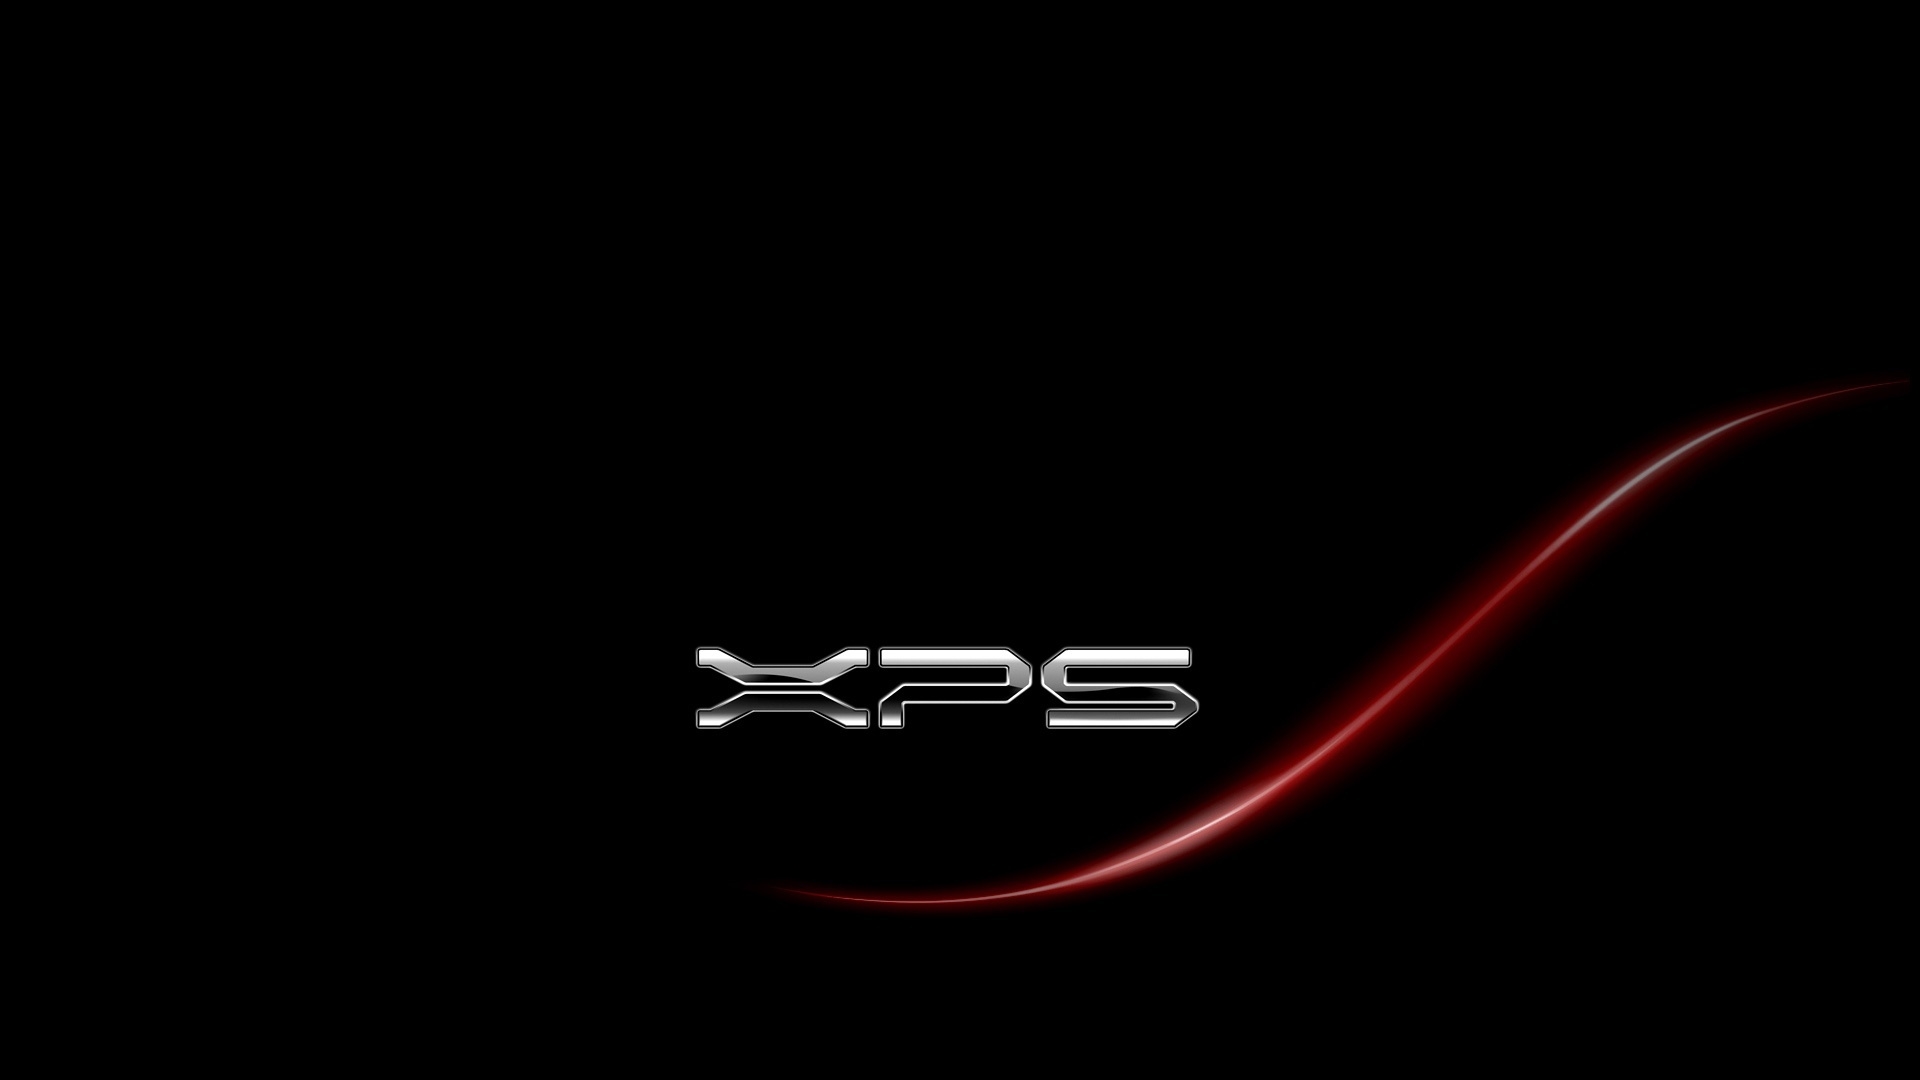 Dell Xps Gaming Red 19 X 1080 Hdtv 1080p Wallpaper